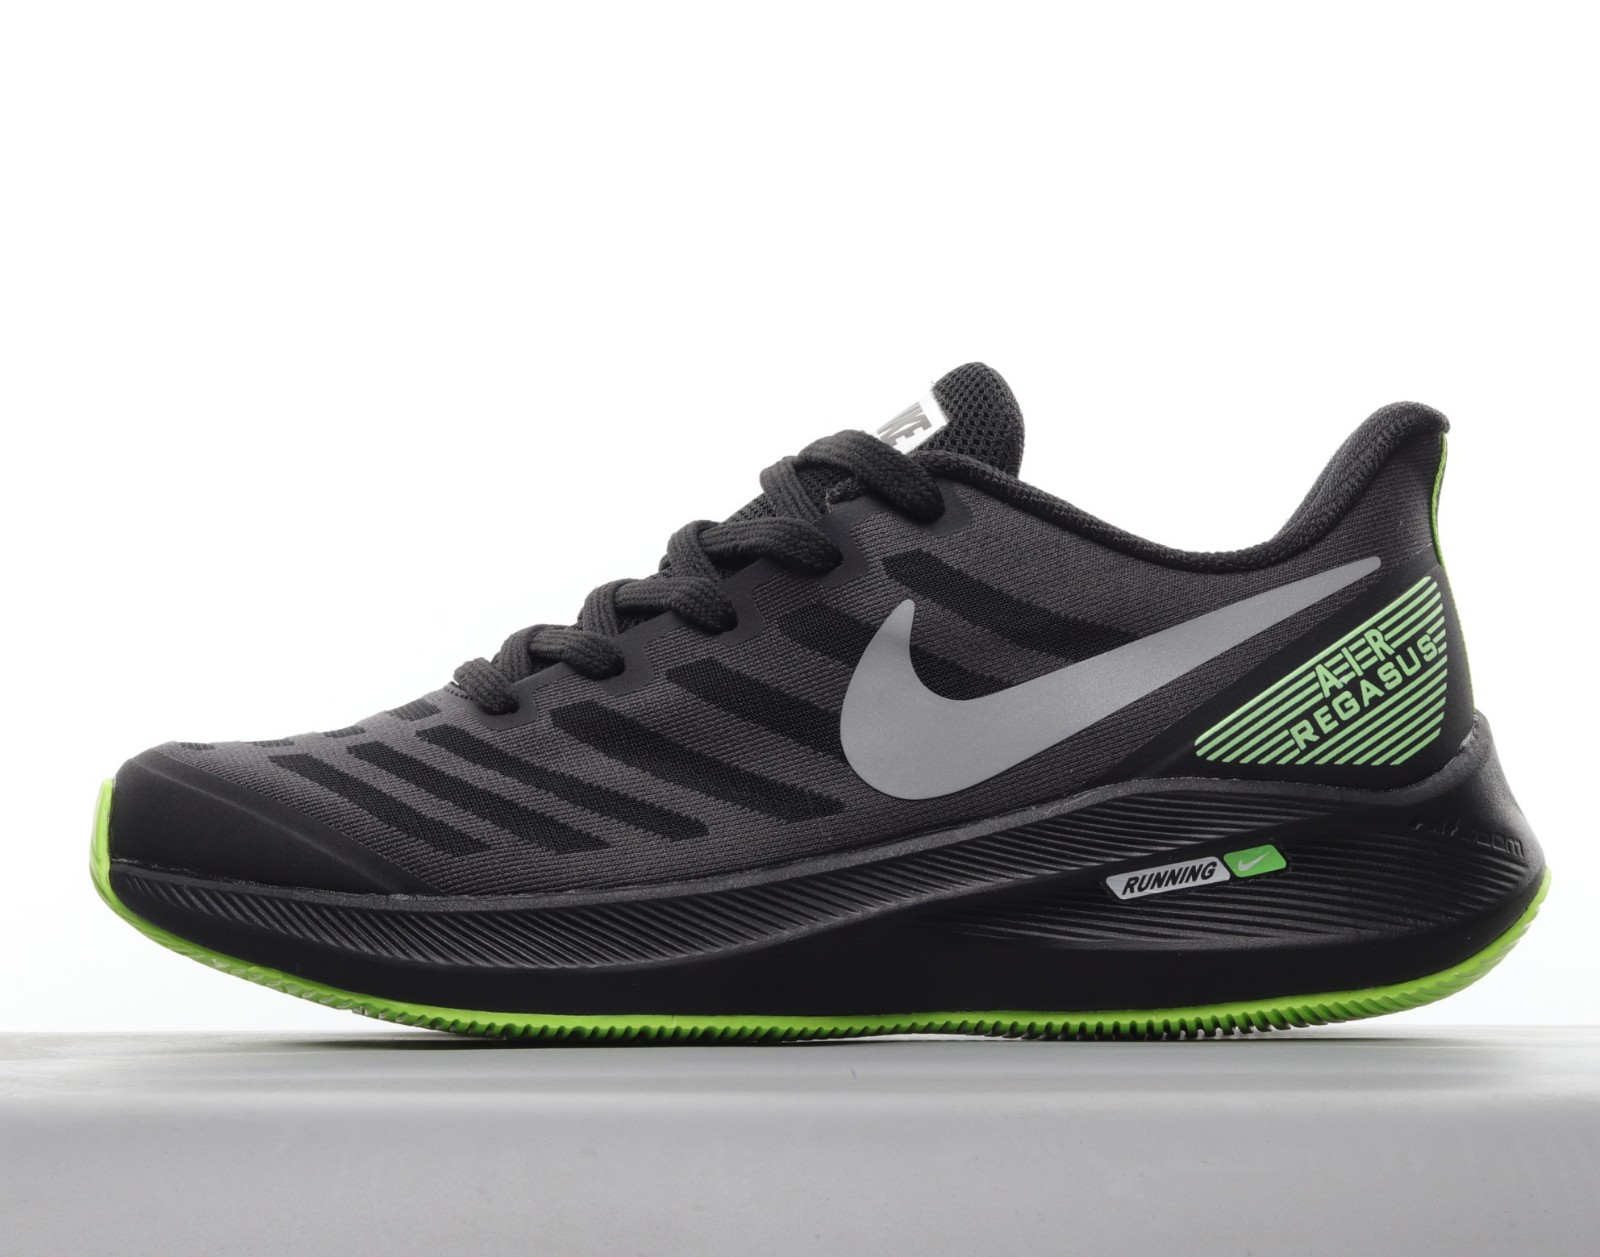 tranquilo colina Disturbio Nike LunarGlide 8 Running Shoes Black Green 843725 - New Womens Muse Metal  Athletic Sneaker Parchment Rose - StclaircomoShops - 005